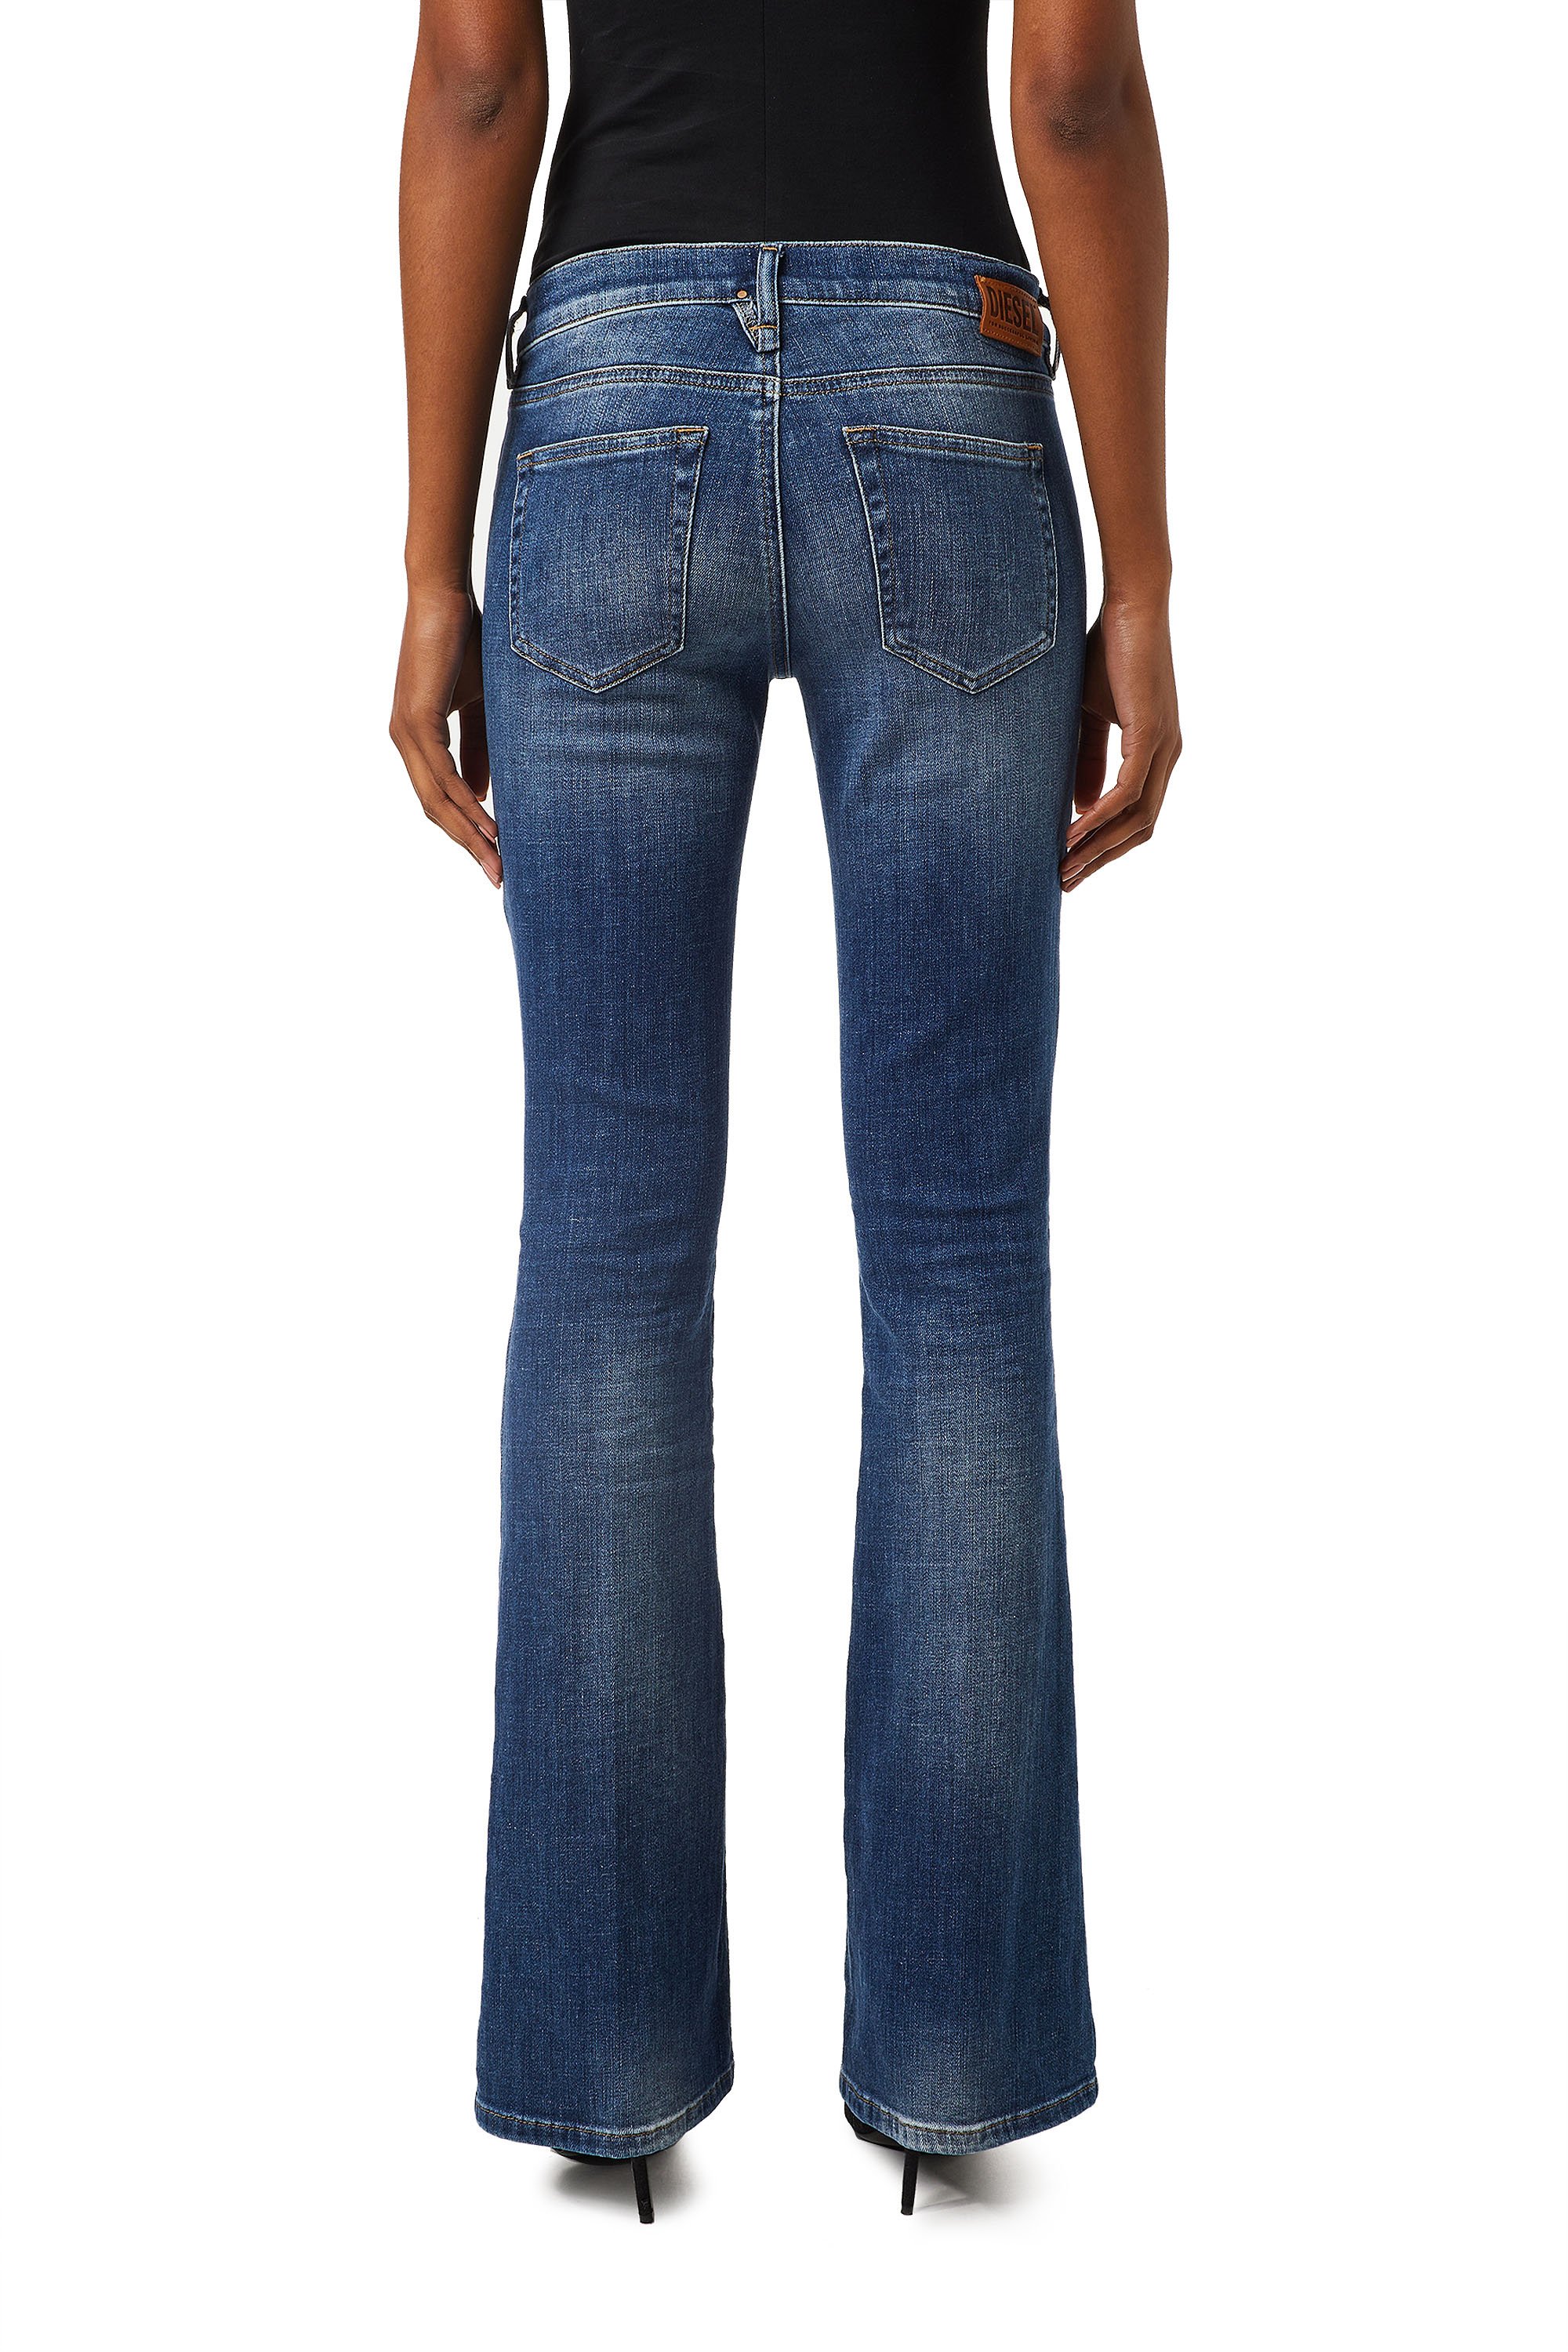 Diesel - 1969 D-EBBEY 086AM Bootcut and Flare Jeans,  - Image 2